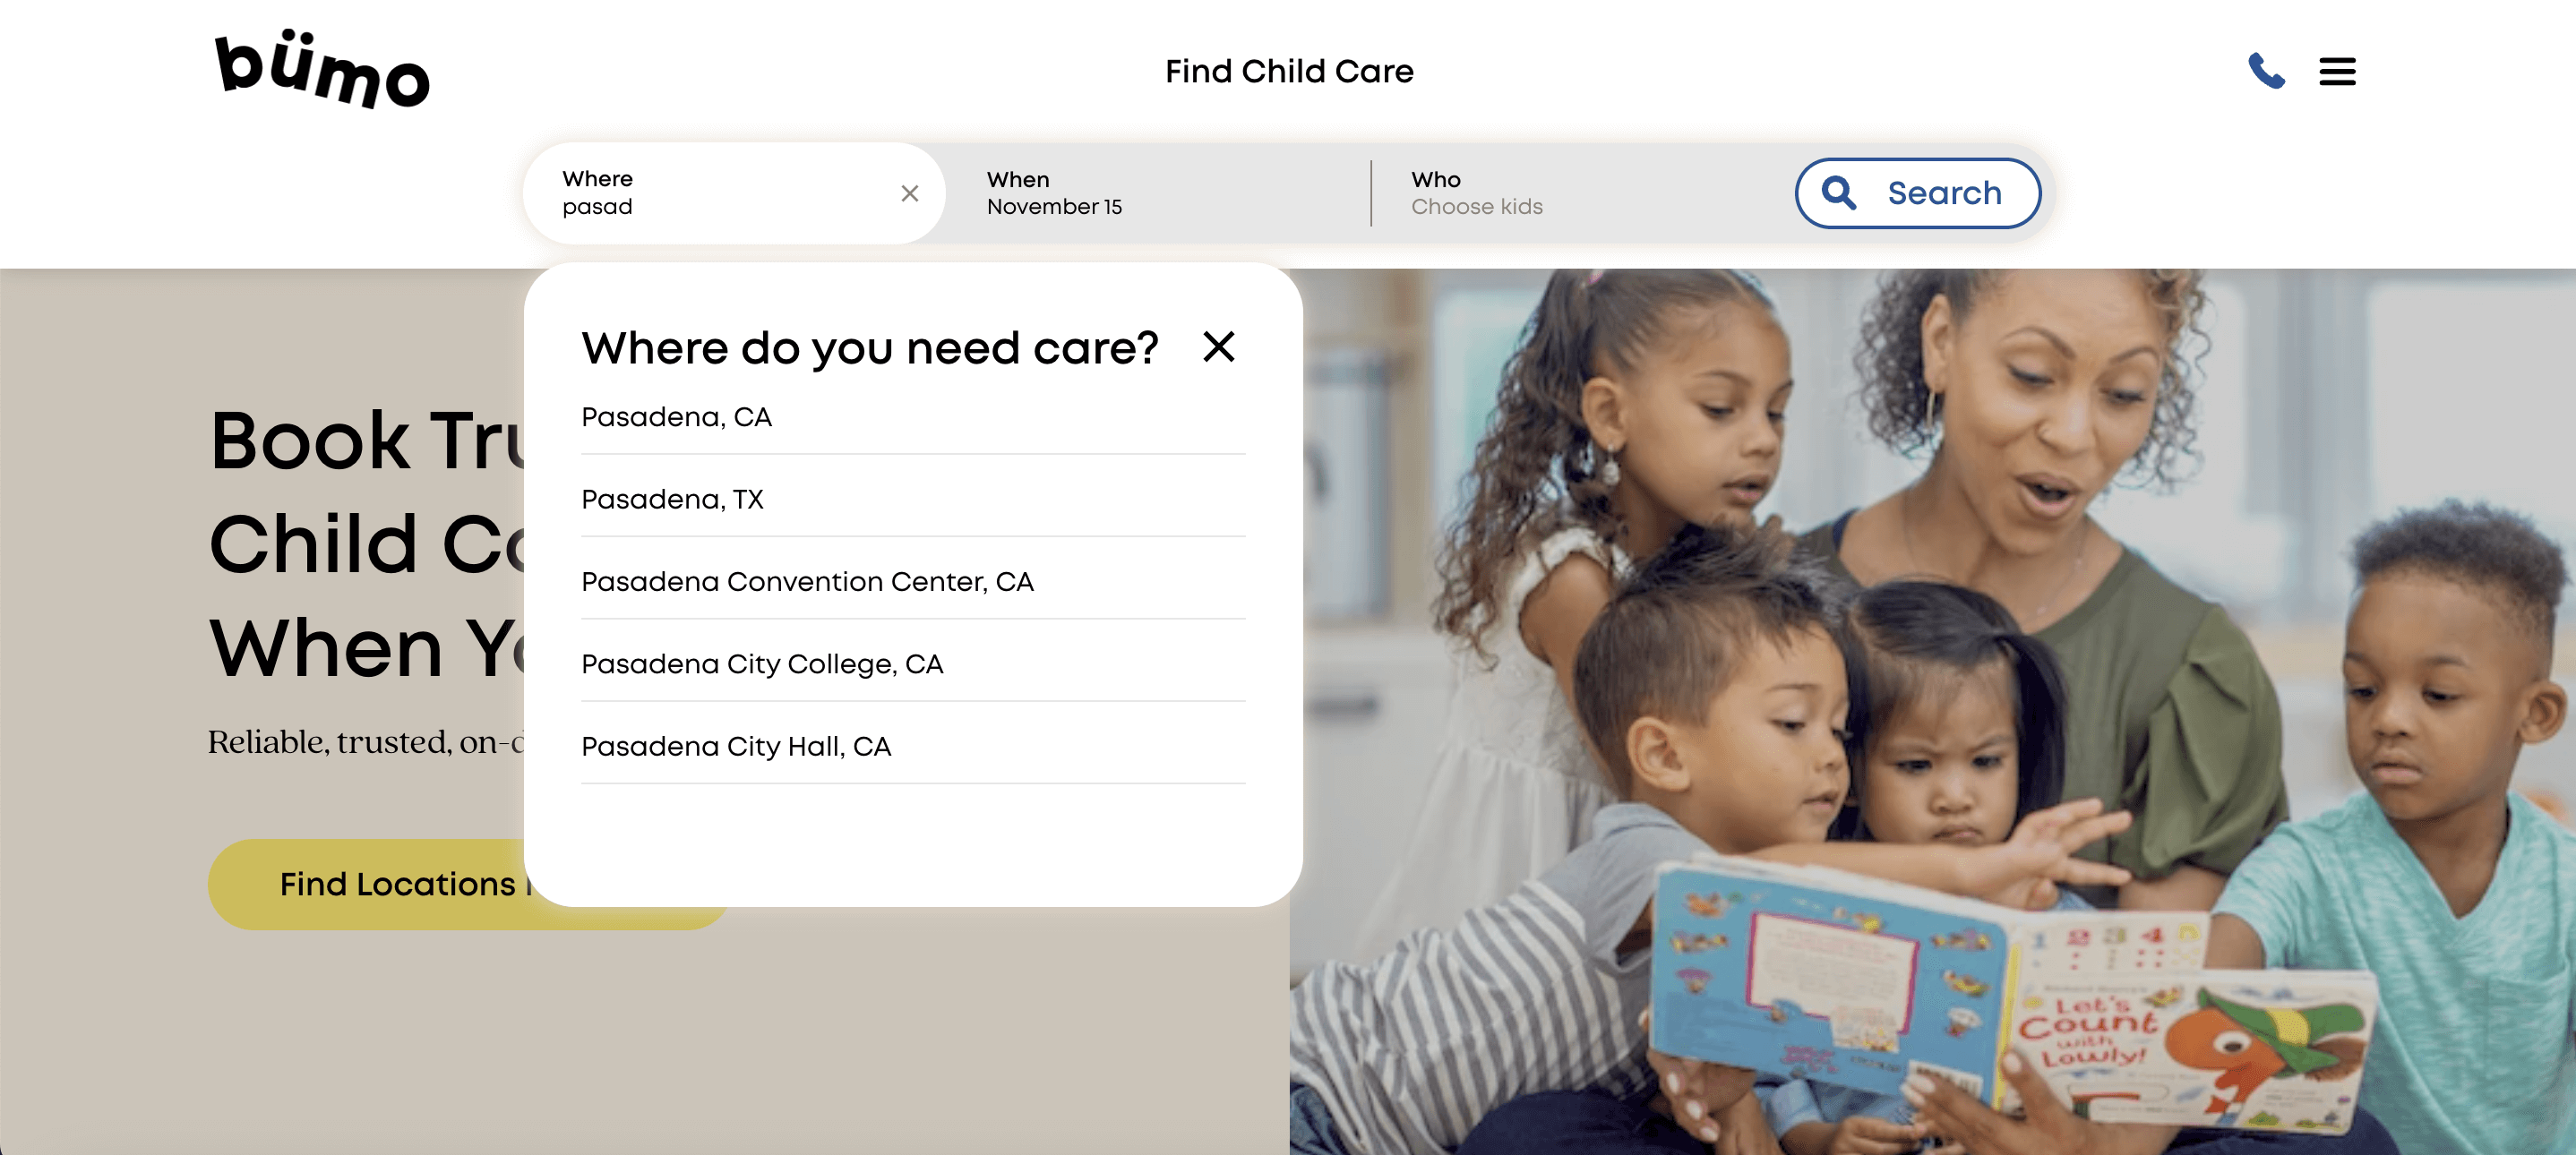 Screen shot of on-demand child care bumo.com search bar